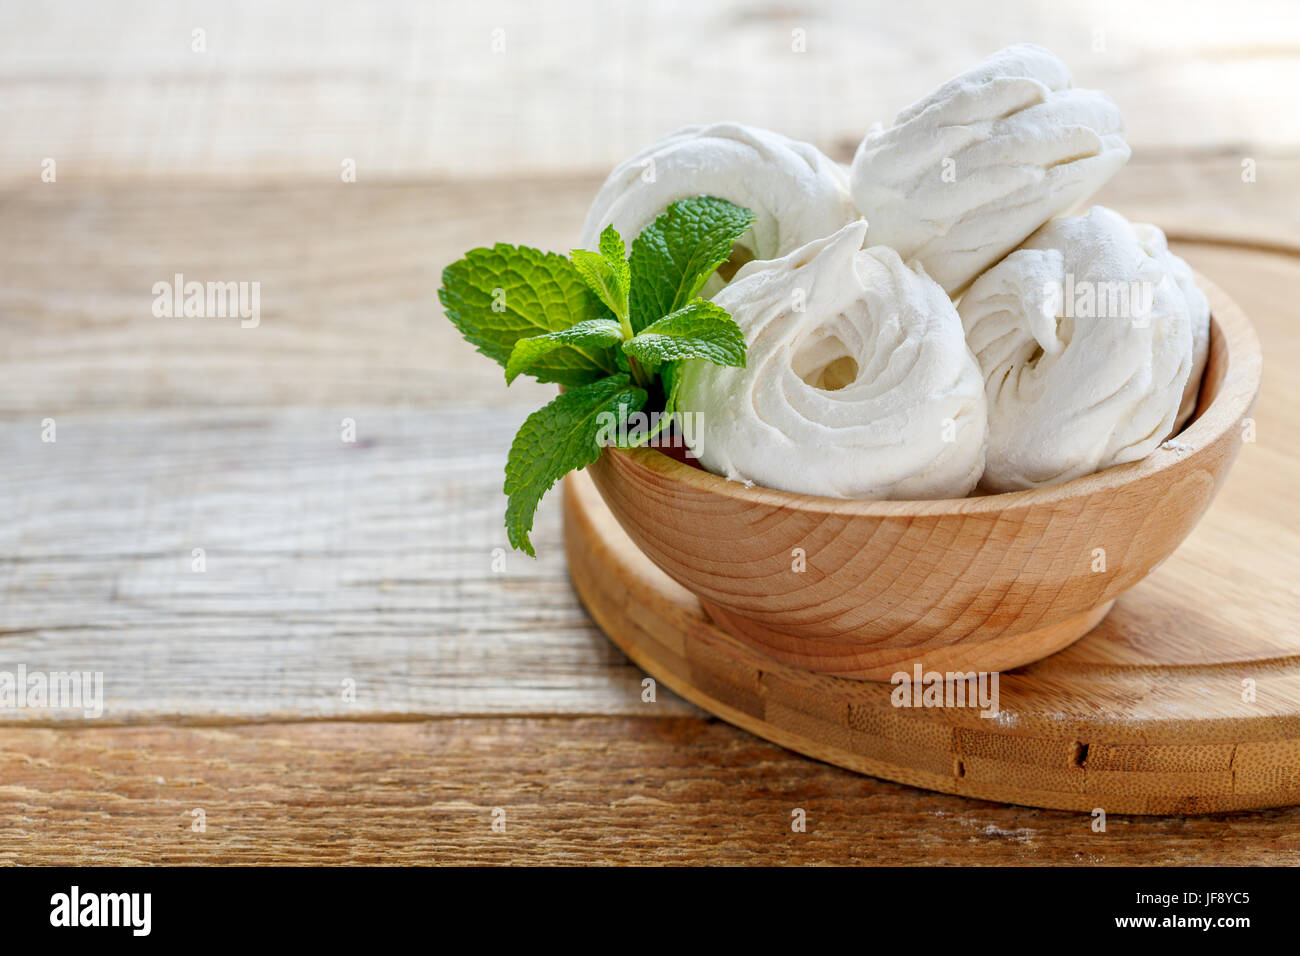 Delicate marshmallow and mint. Stock Photo